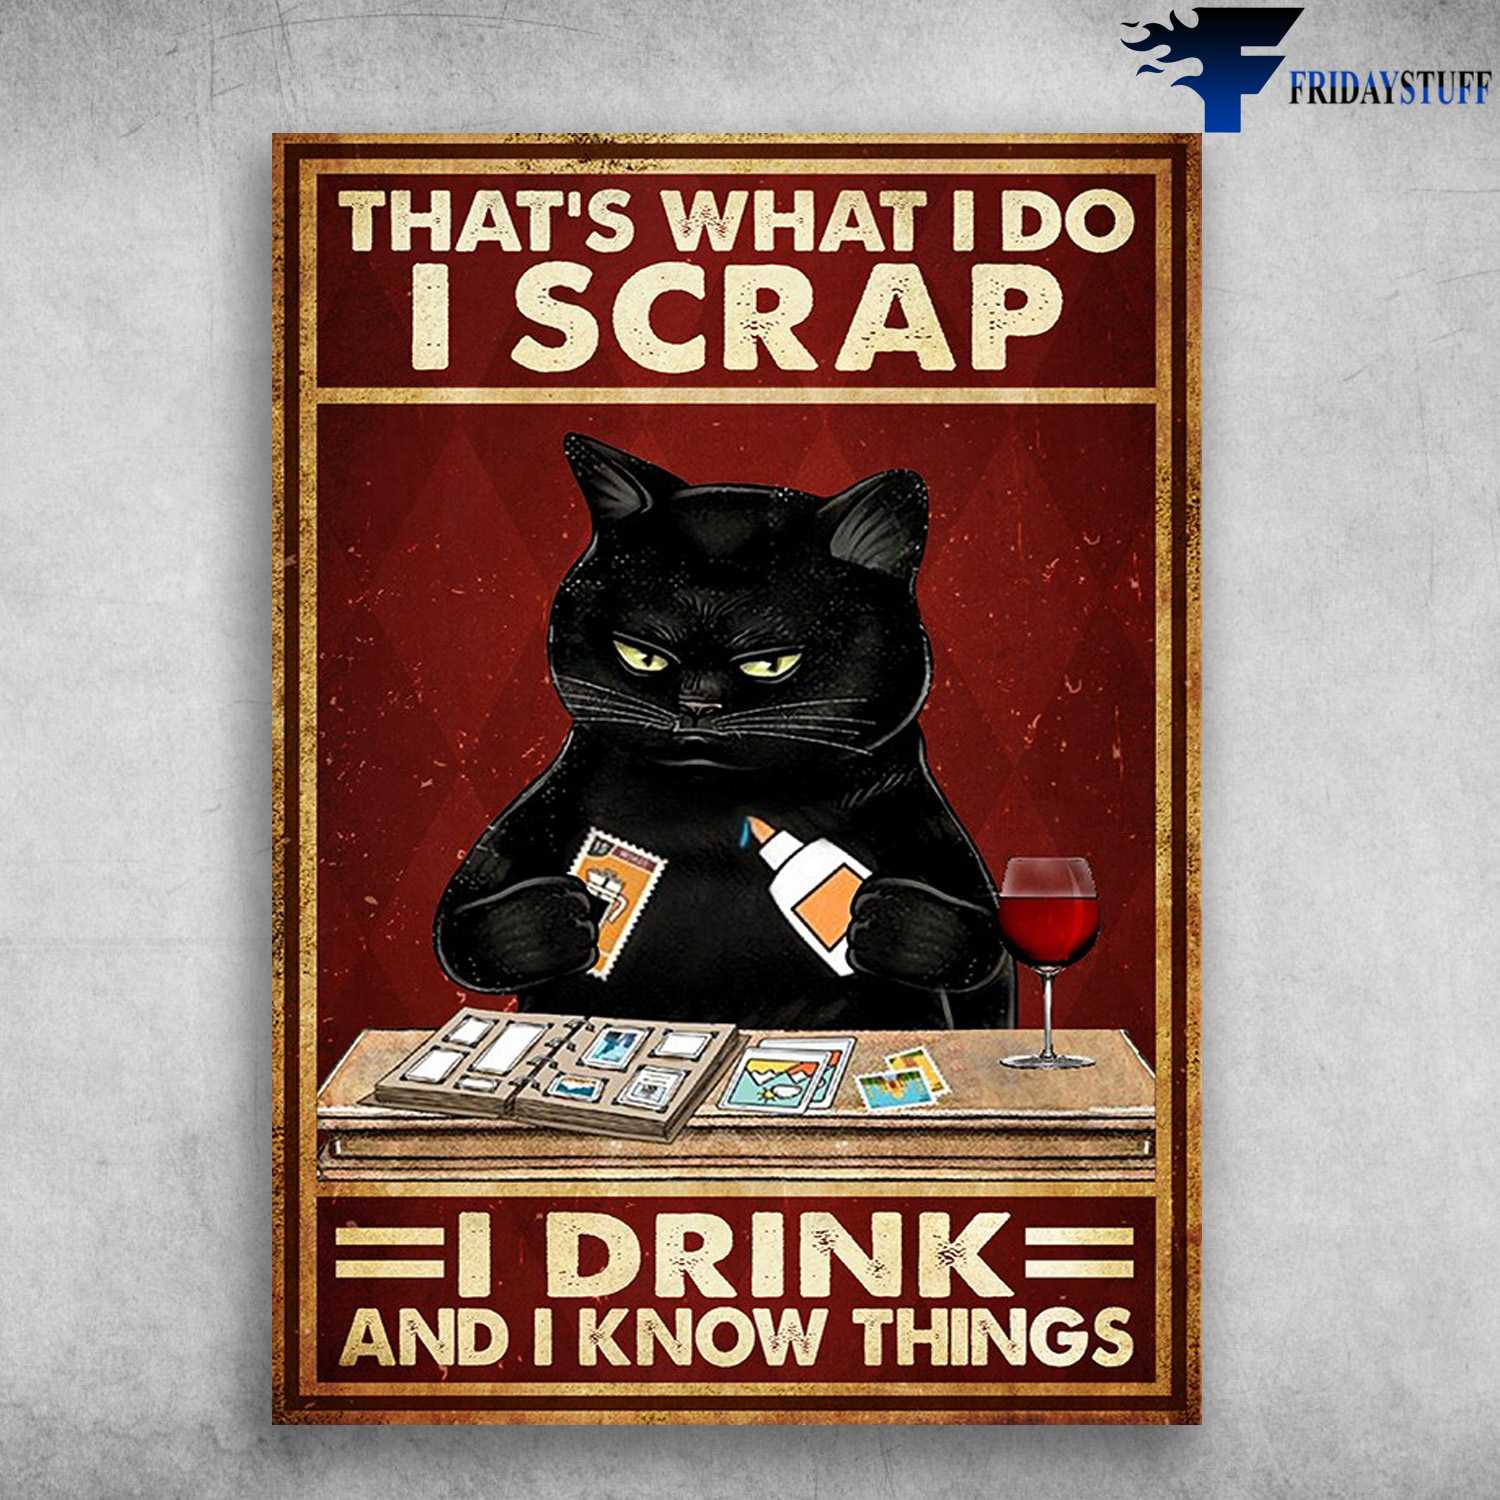 Black Cat, Scrap With Wine - That's What I Do, I Scrap, I Drink, And I Know Things